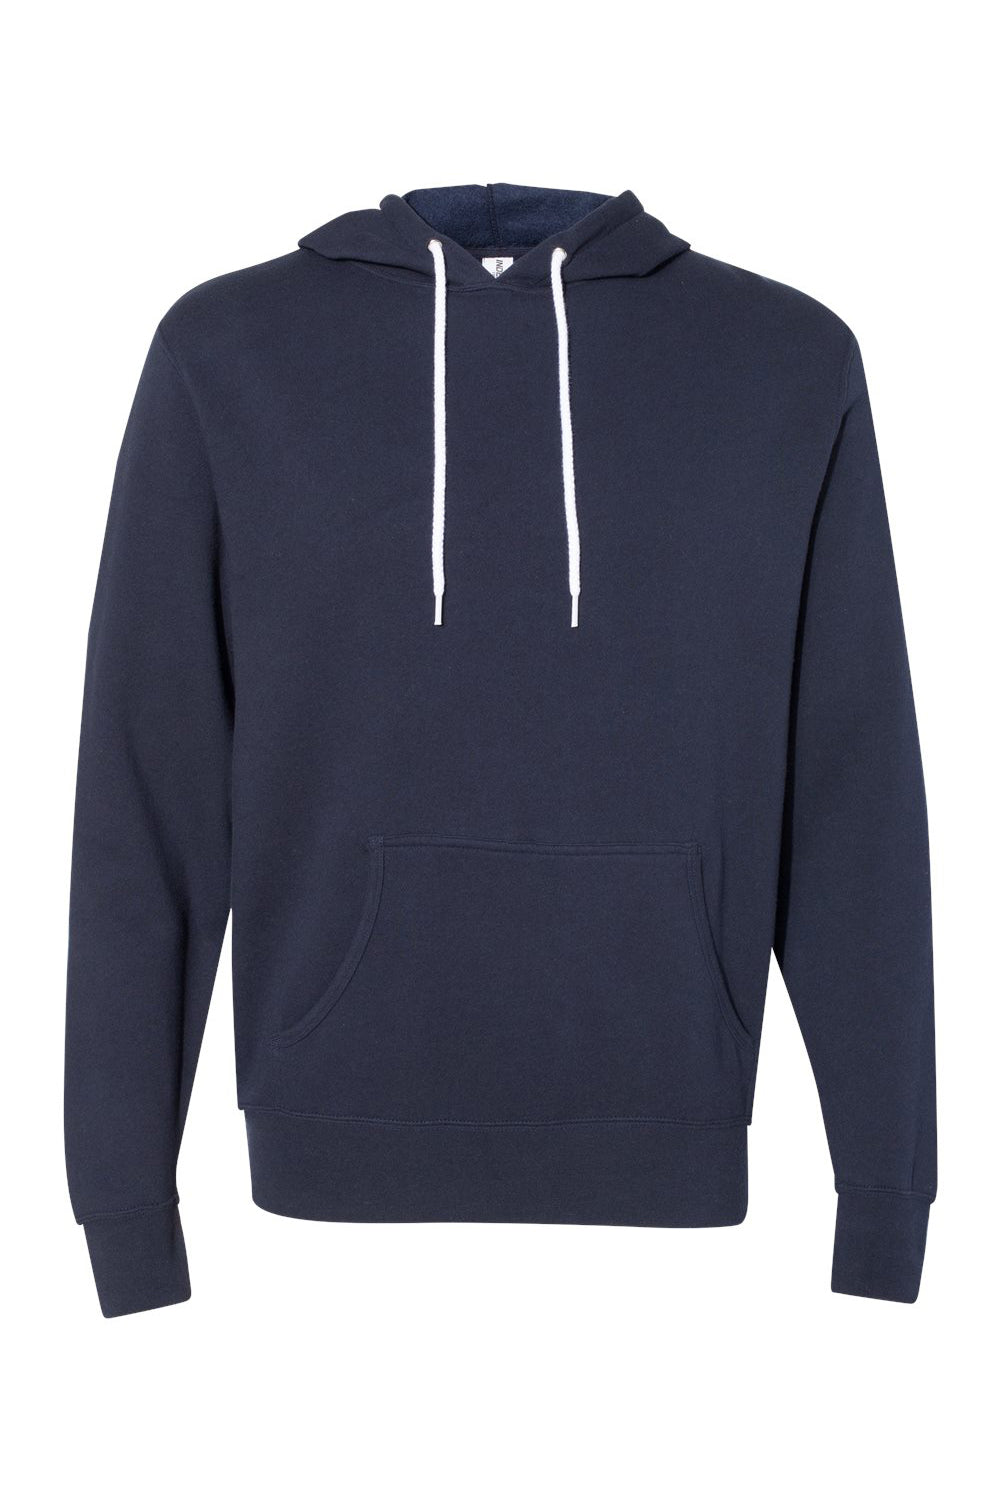 Independent Trading Co. AFX90UN Mens Hooded Sweatshirt Hoodie Classic Navy Blue Flat Front